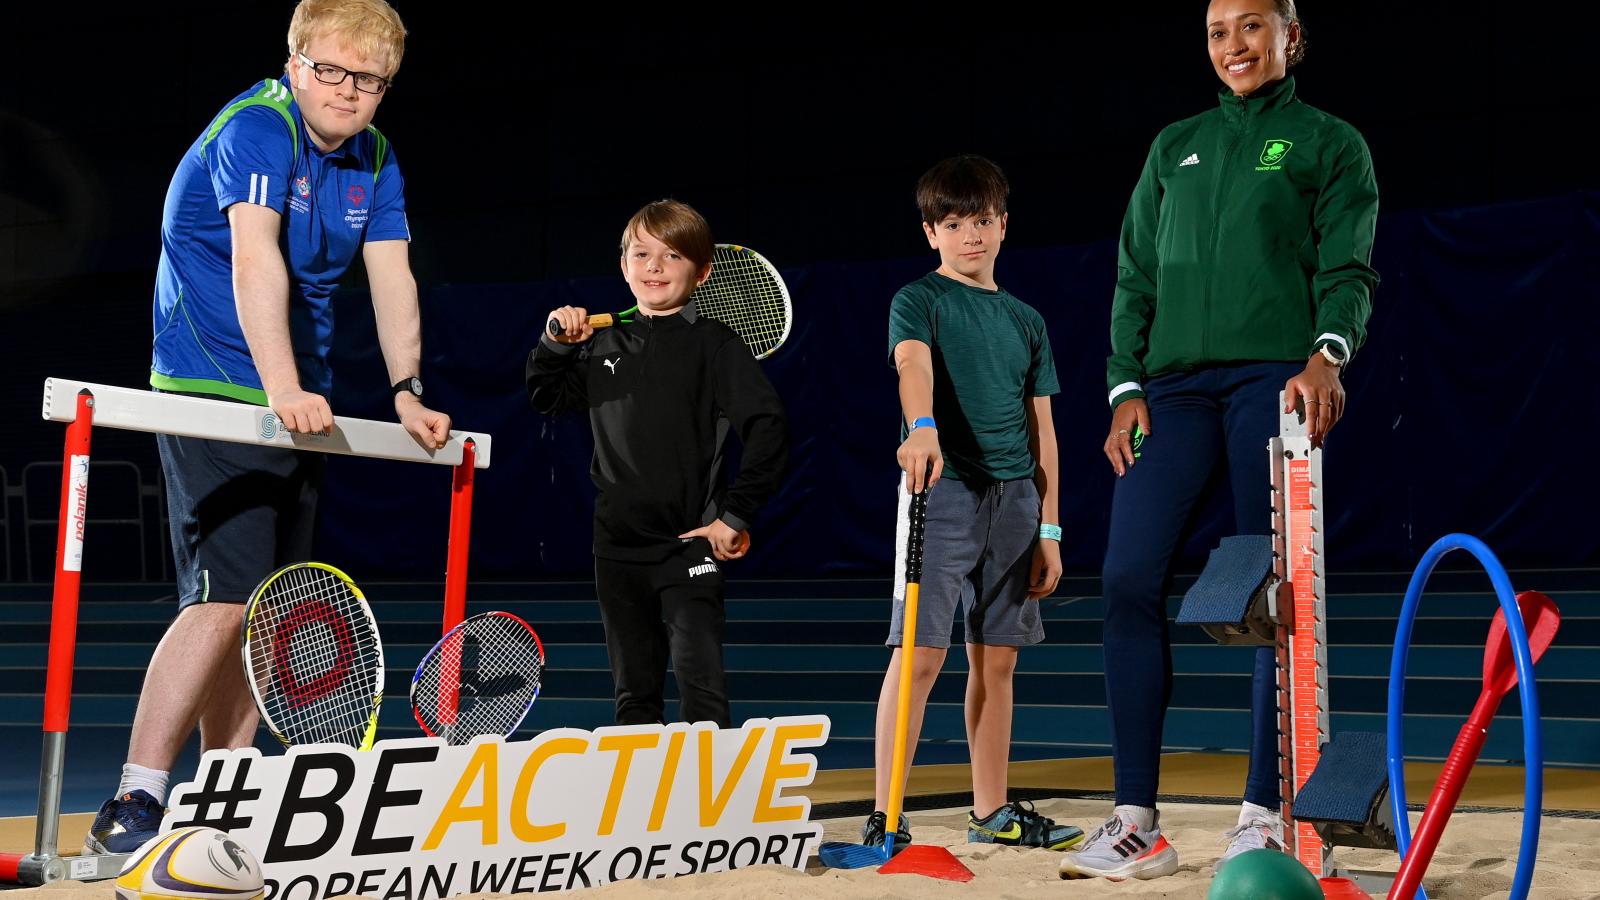 Come out and celebrate sport at the #BeActive Festival on Sunday, September 24th 🤾🤸‍♀️🤼‍♀️⛹️‍🤺🏌️‍♀️ Sport Ireland Campus, with help from ambassadors 🏃‍♀️Nadia Power (800m athlete) and 🏊‍♀️Eoin O’Connell (1500m Open Swimming, Special Olympics Medallist), invite you to come try a multitude of different sports and activities as part of European Week of Sport 2023. #BeActive Festival will showcase over 40 different activities that visitors can take part in on the day, located in the world-class Sport Ire